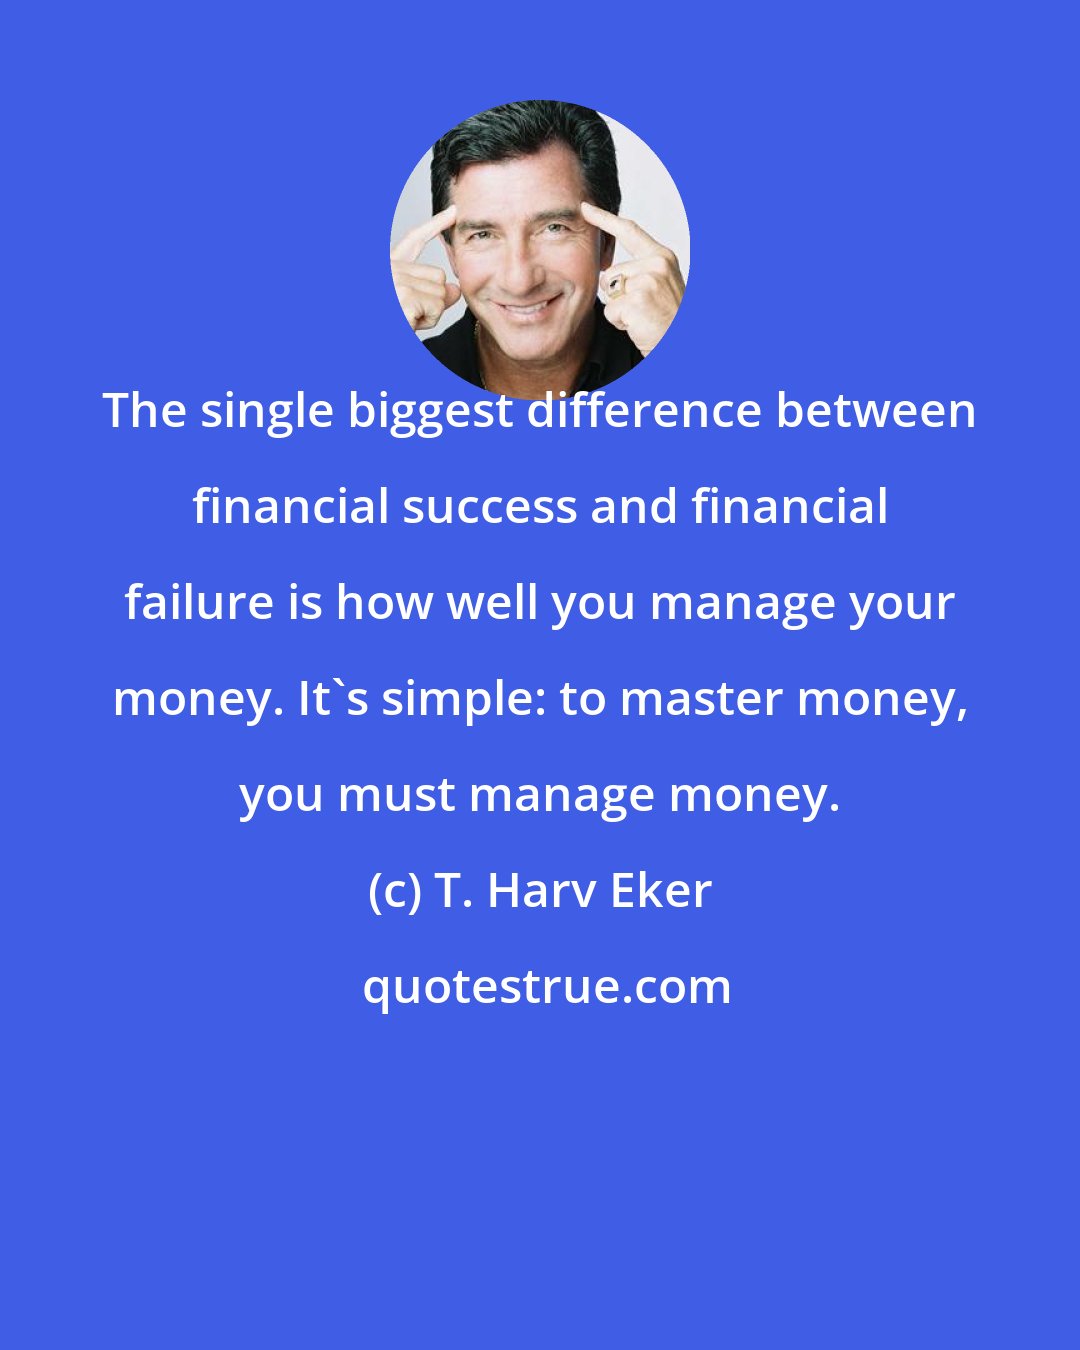 T. Harv Eker: The single biggest difference between financial success and financial failure is how well you manage your money. It's simple: to master money, you must manage money.